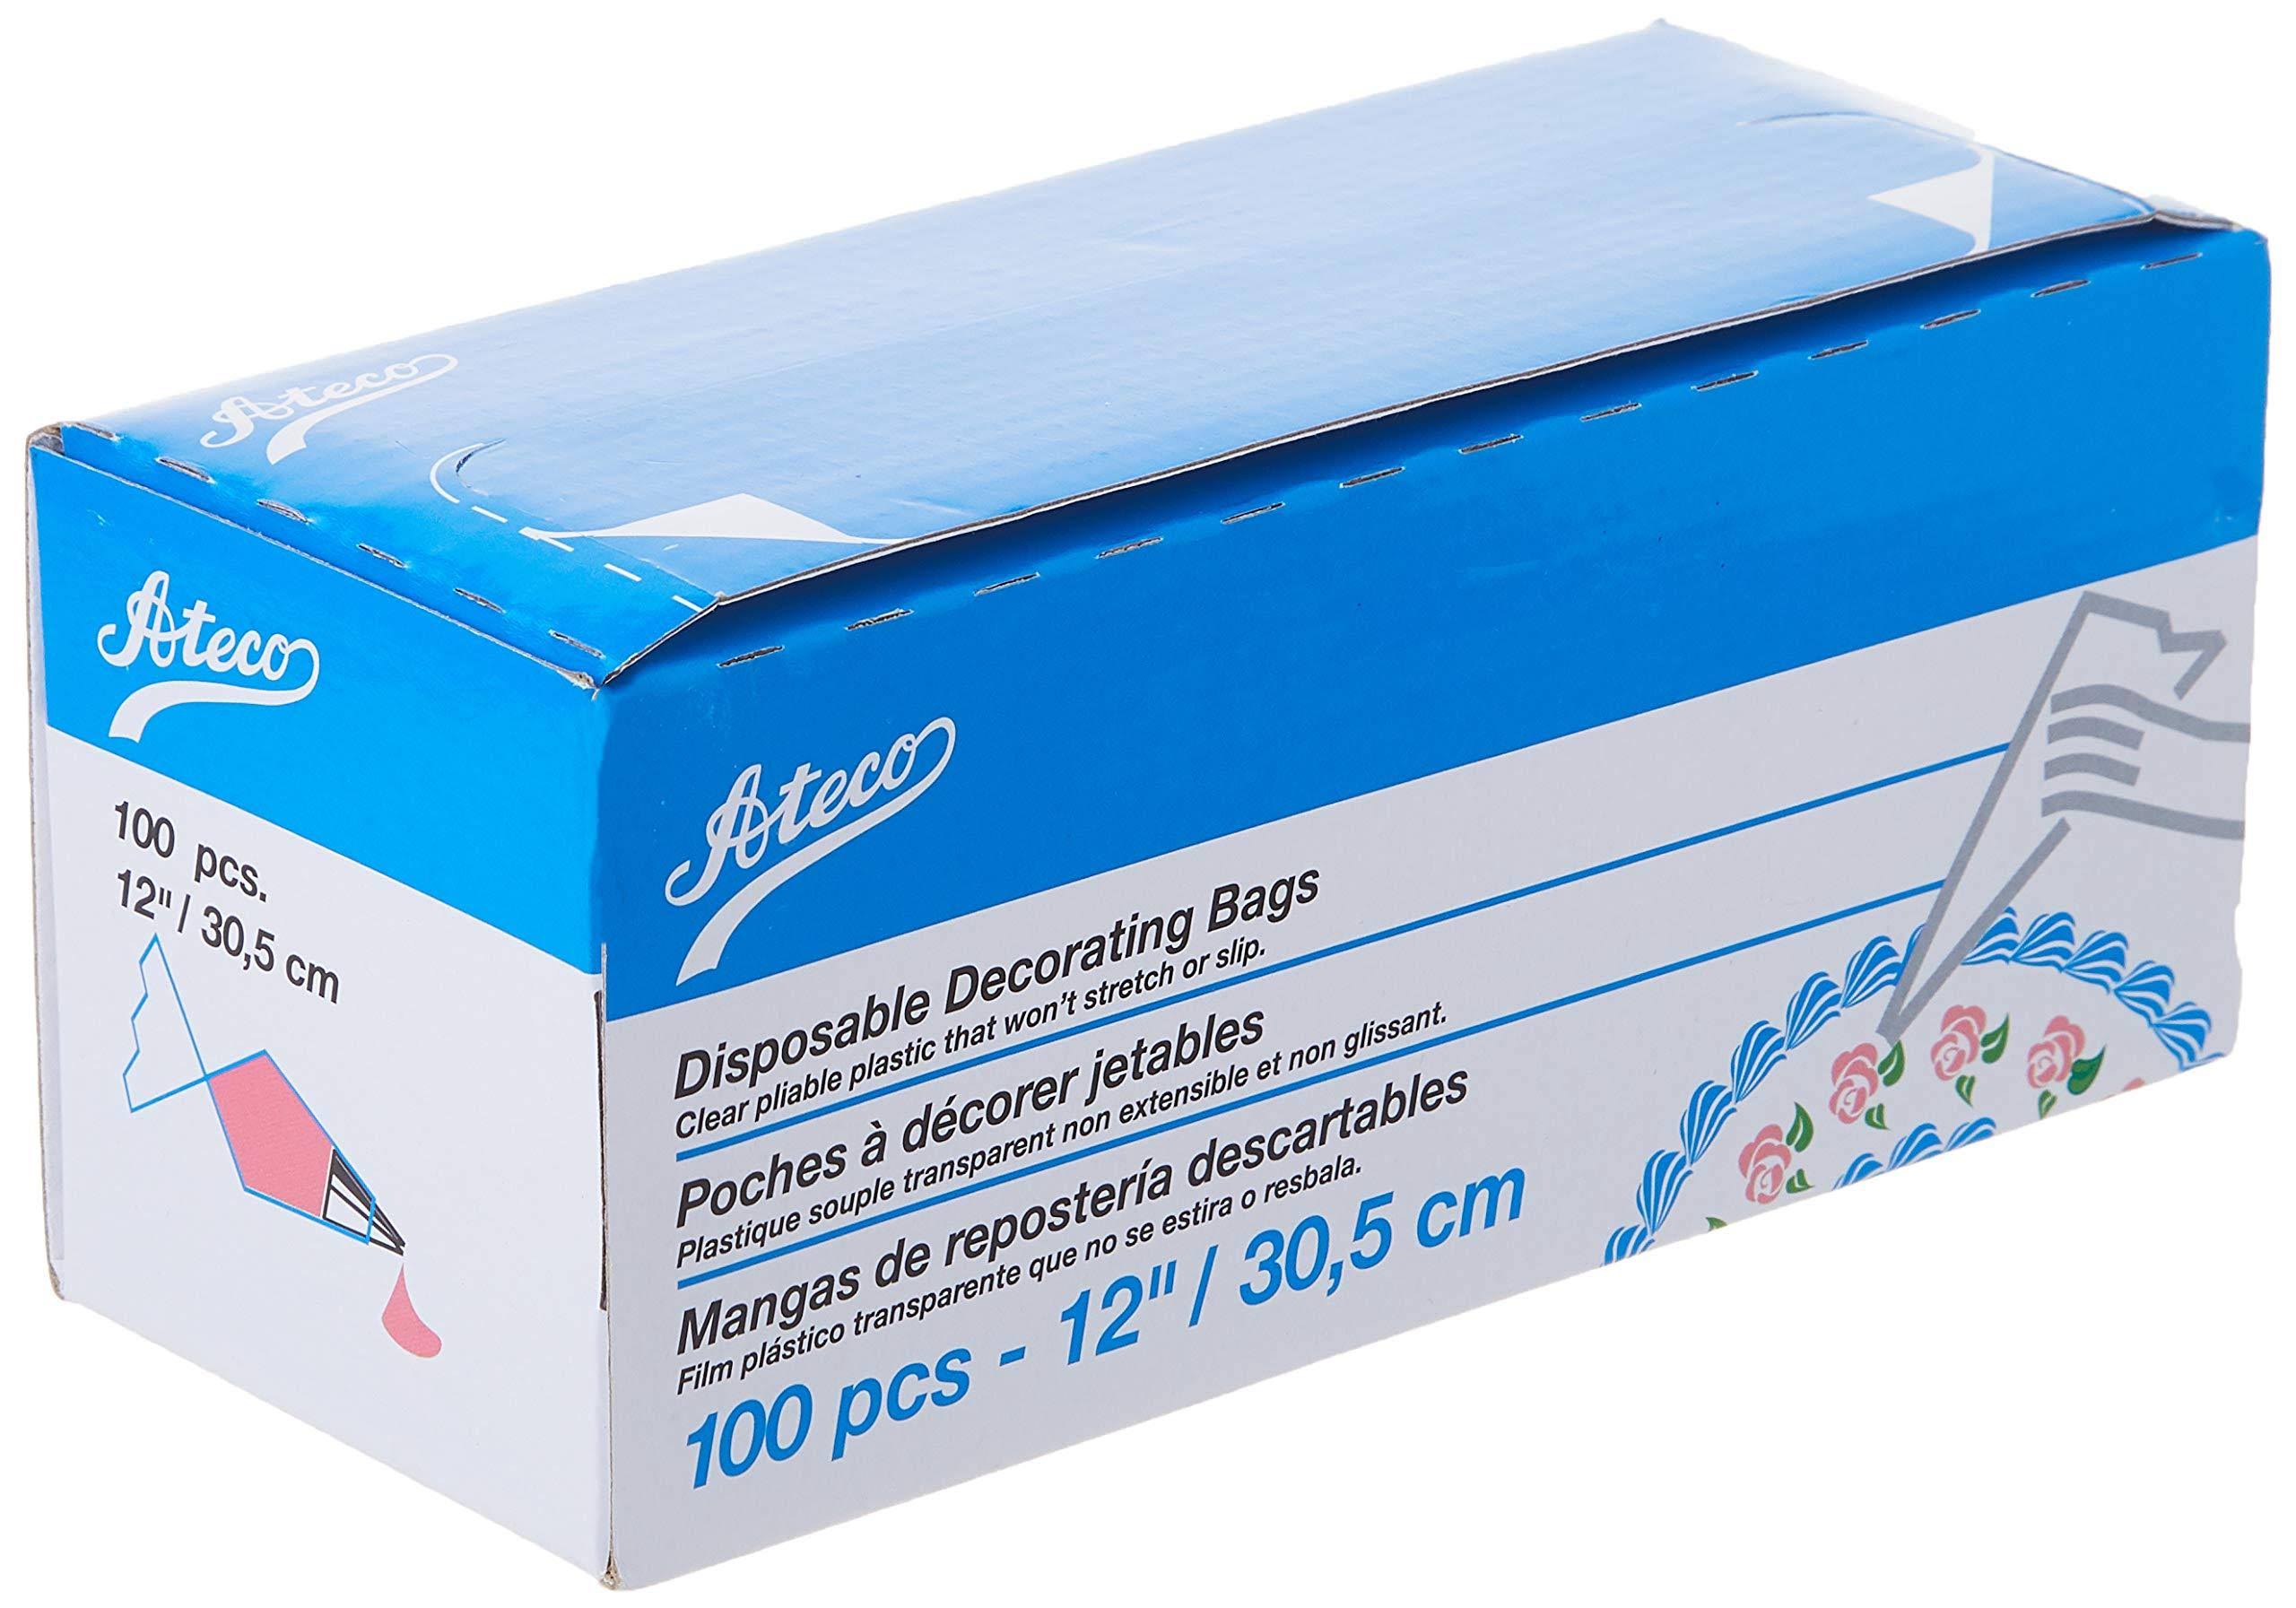 Ateco Disposable Decorating Bags - 12", 100ct